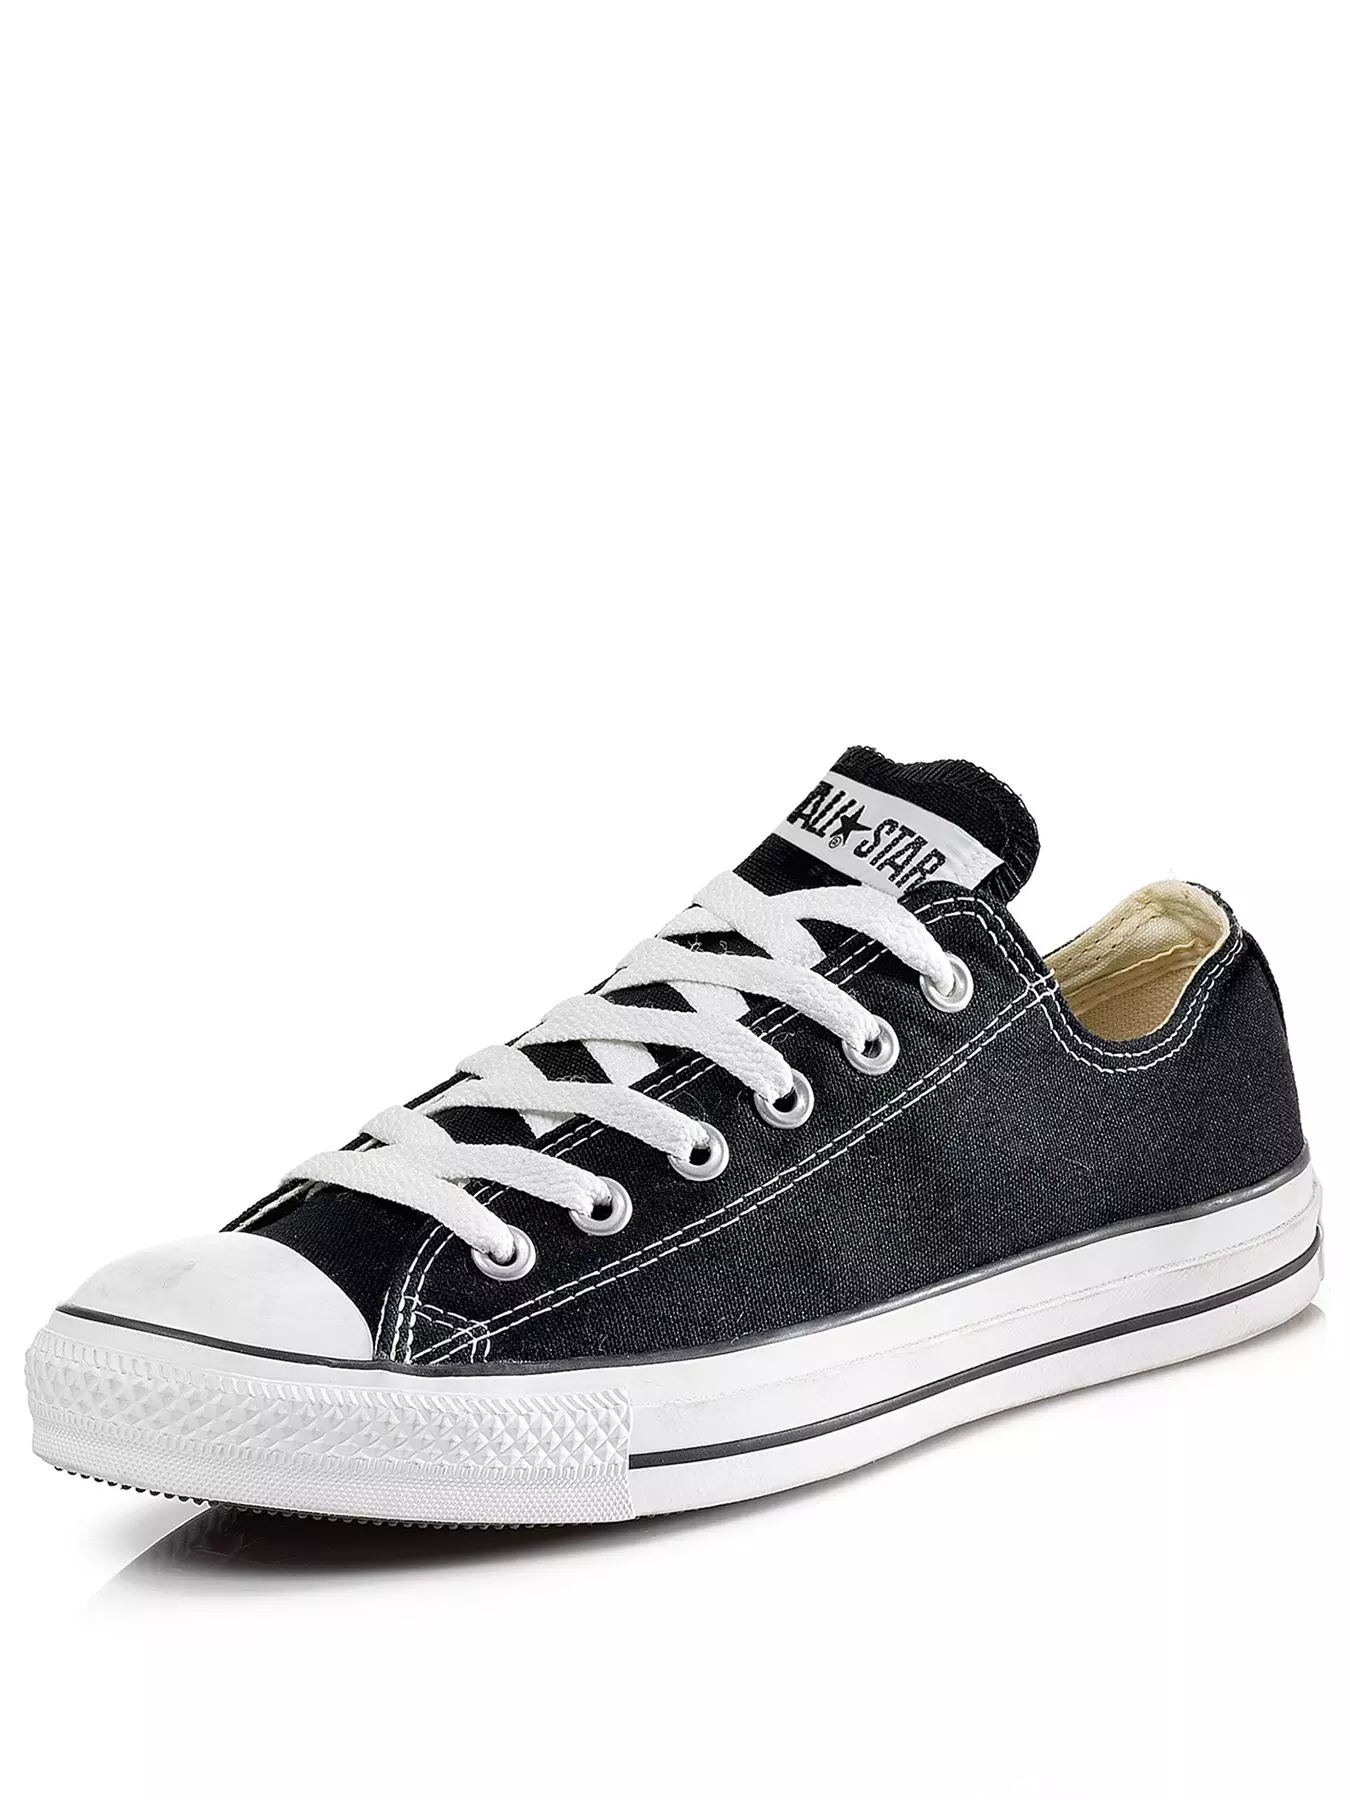 Women's Black Converse Trainers | All | Very.co.uk